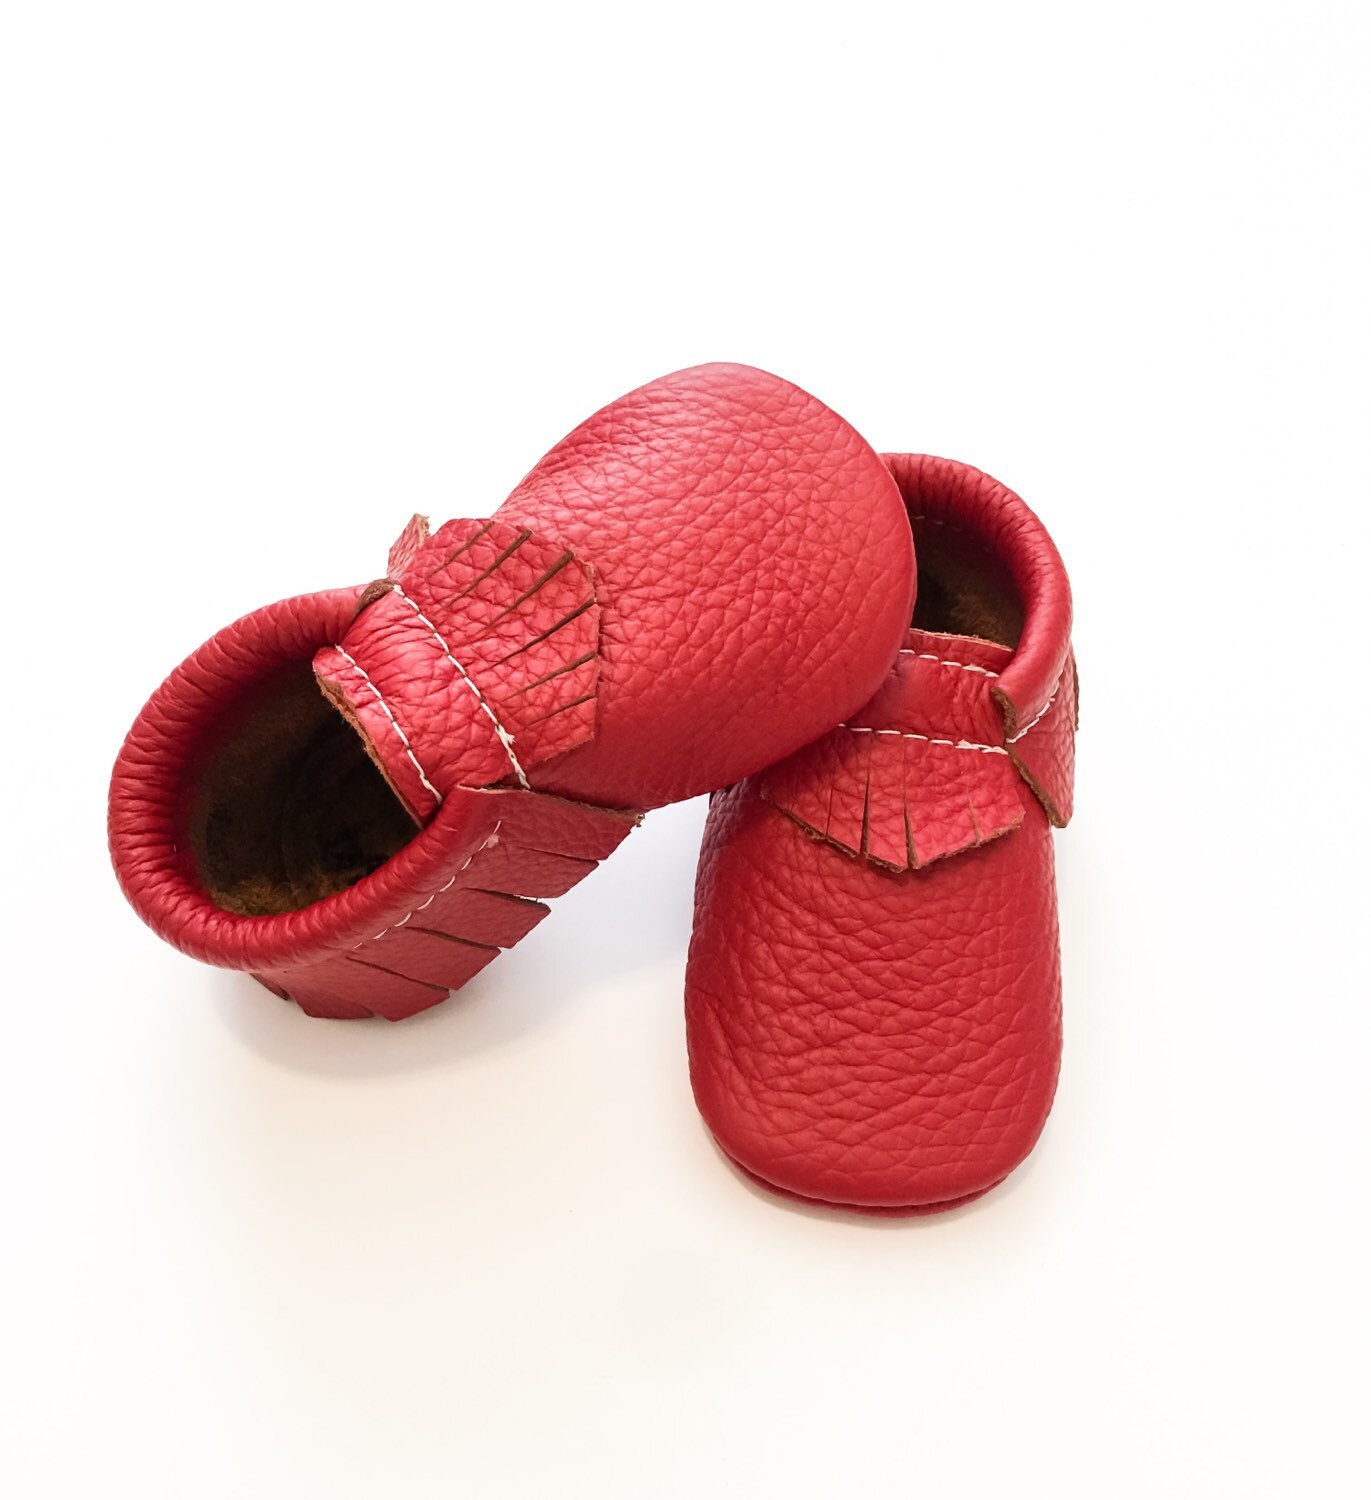 Red Baby moccasins toddler moccasins leather baby by WildExplorers